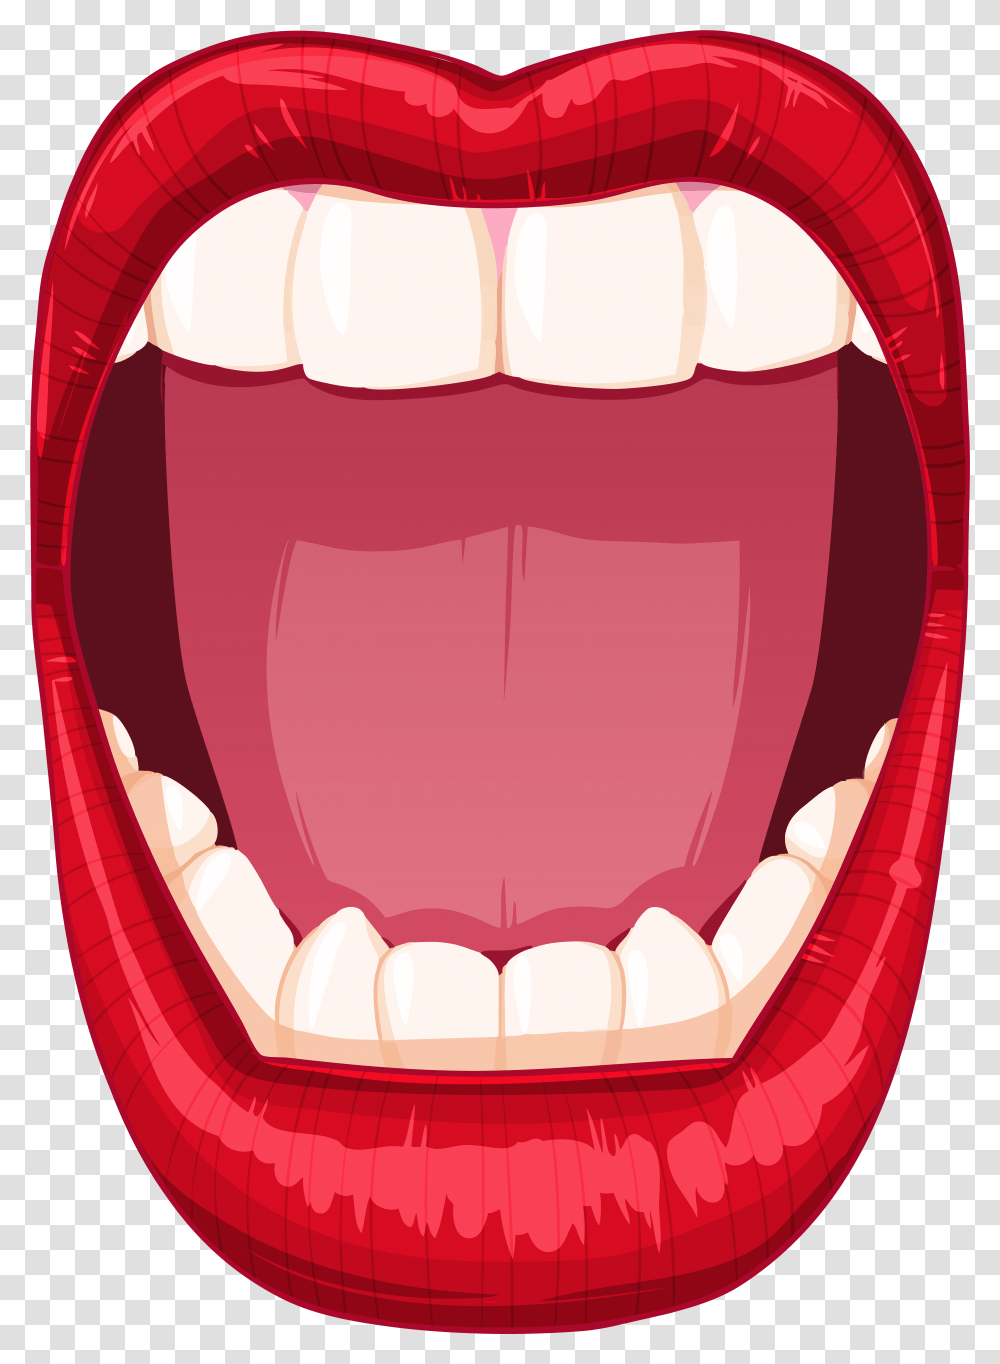 Open Mouth Clip Art Cartoon Mouth, Teeth, Tongue, Maroon, Jaw Transparent Png